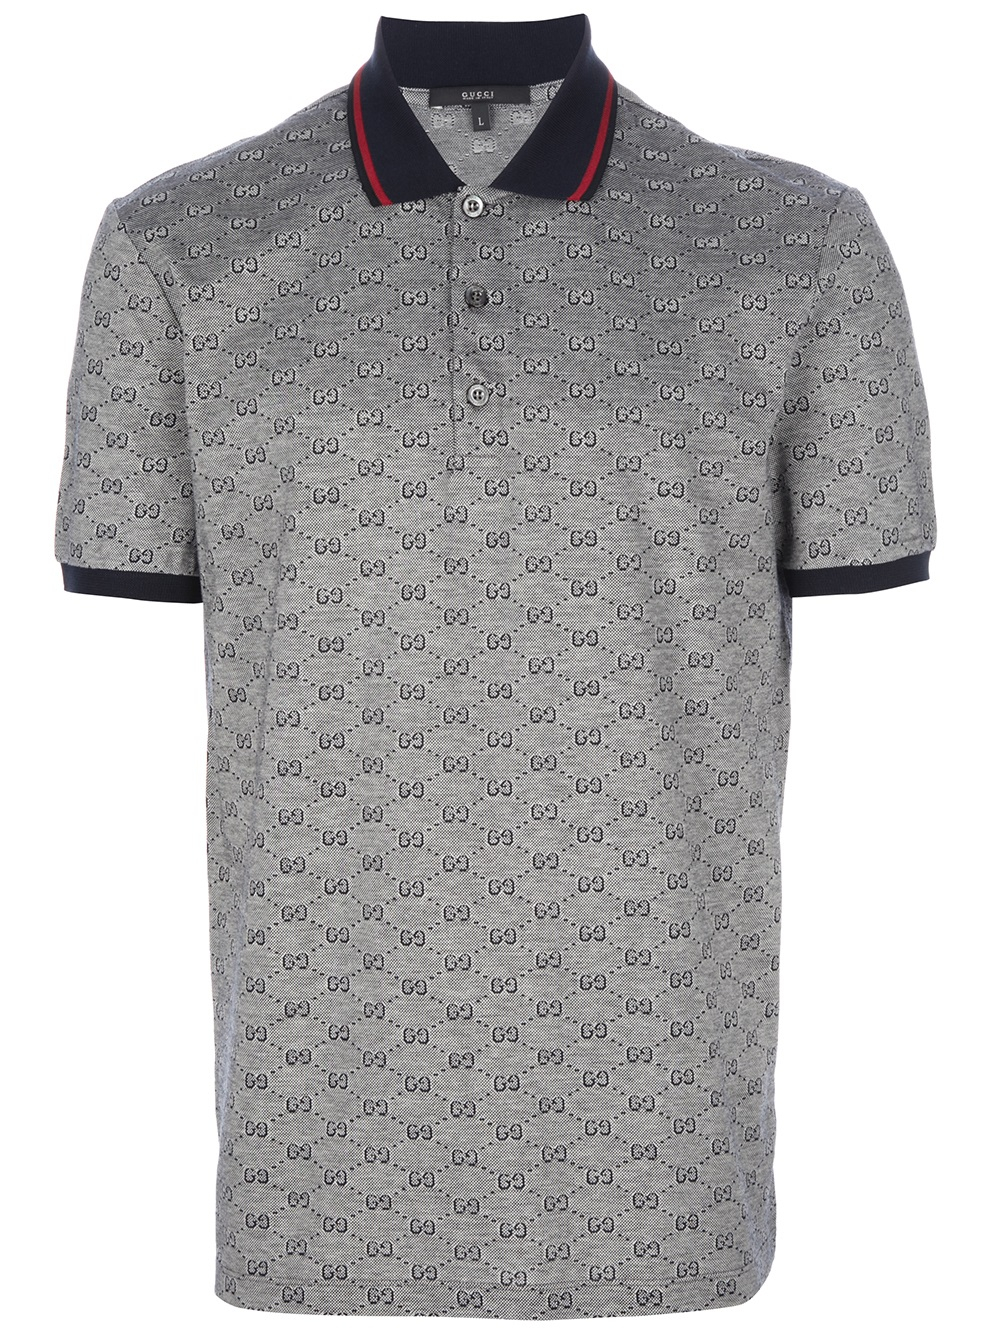 Lyst - Gucci Monogram Polo Shirt in Blue for Men